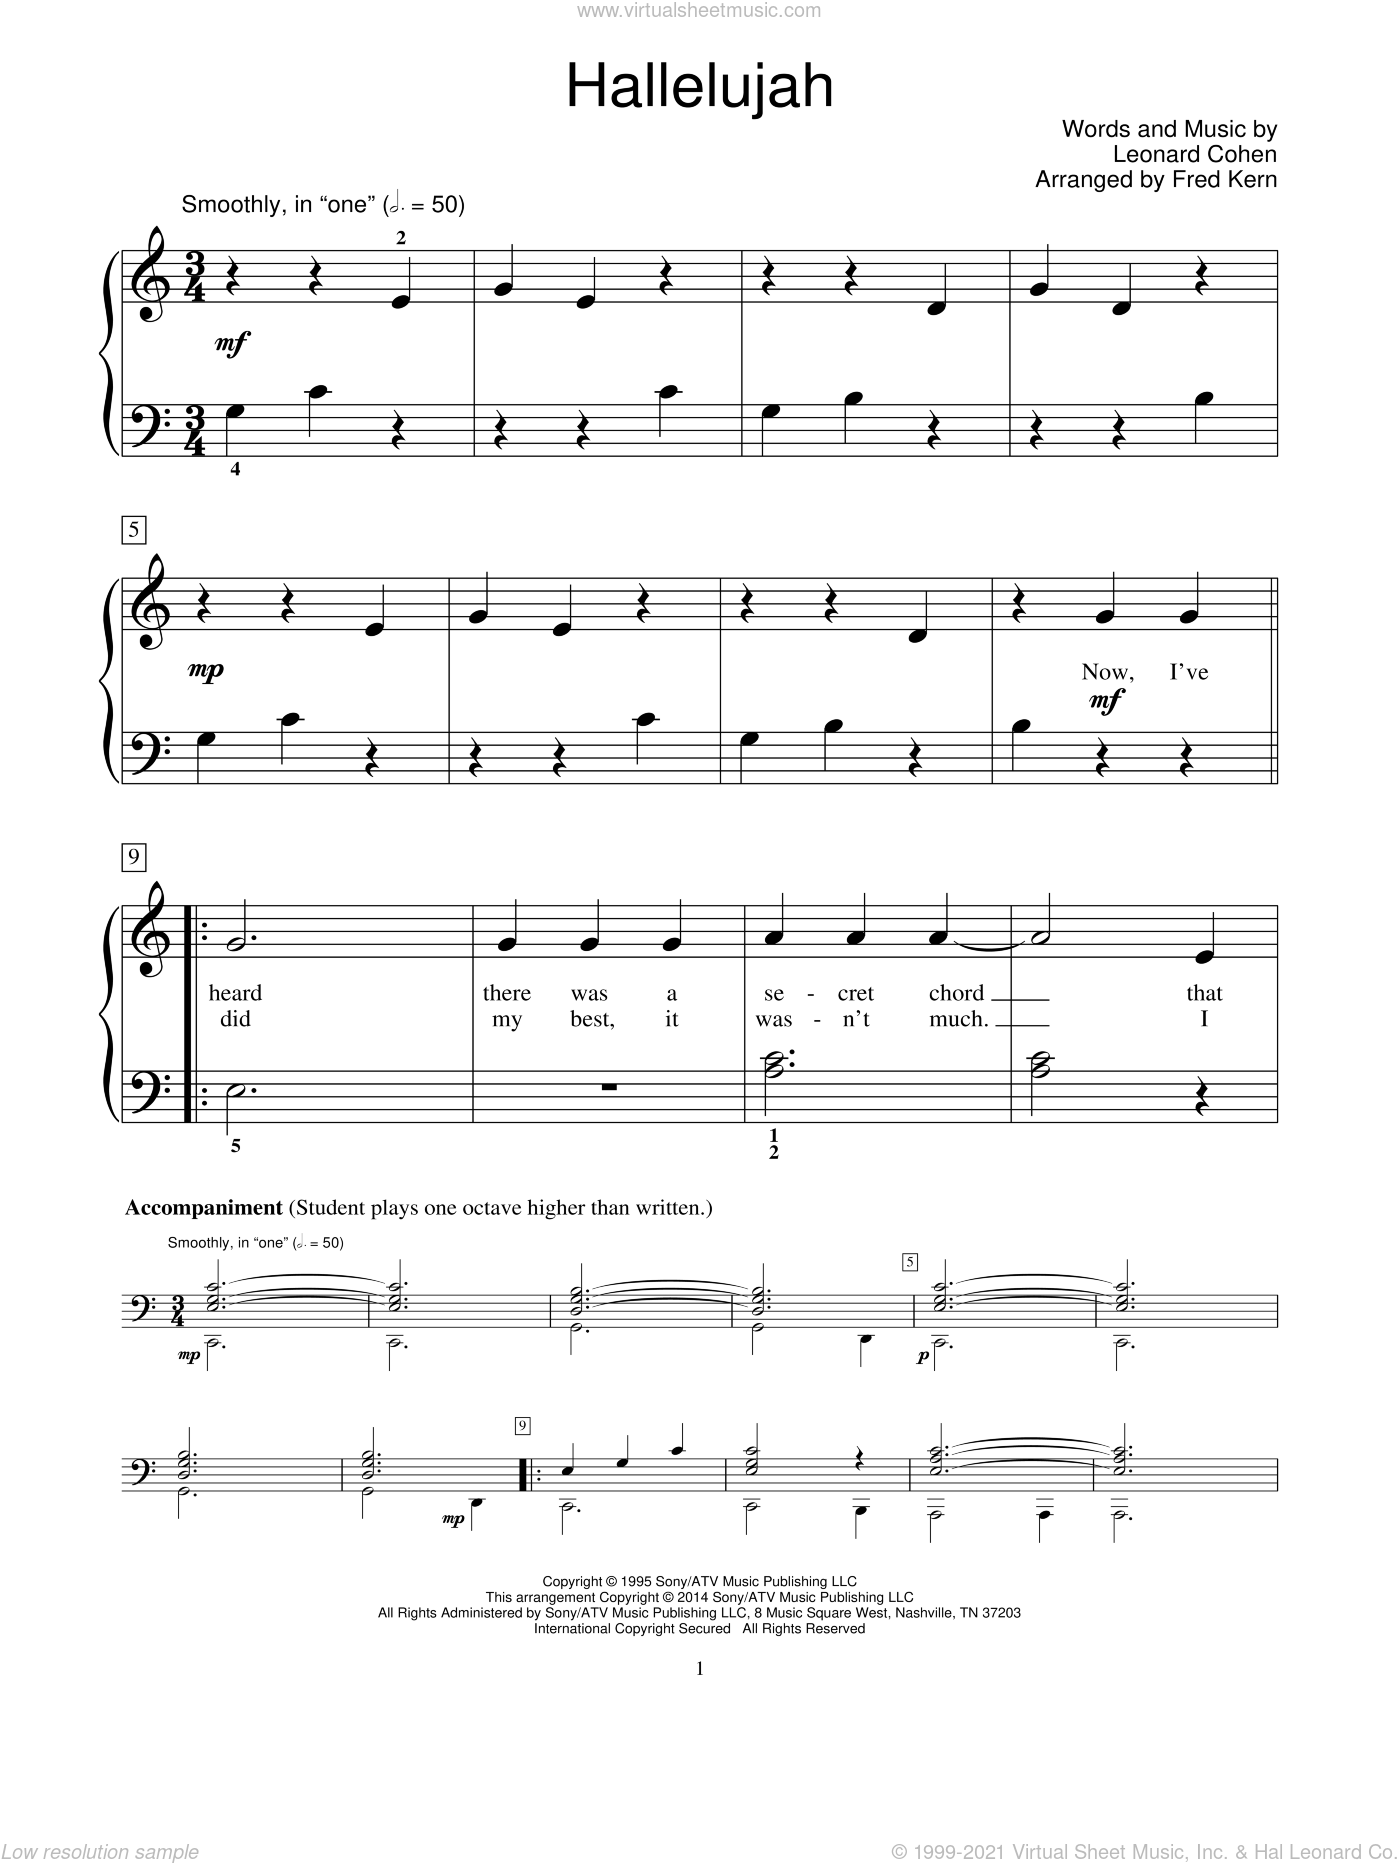 Music Sheet For Hallelujah On Piano - Best Music Sheet